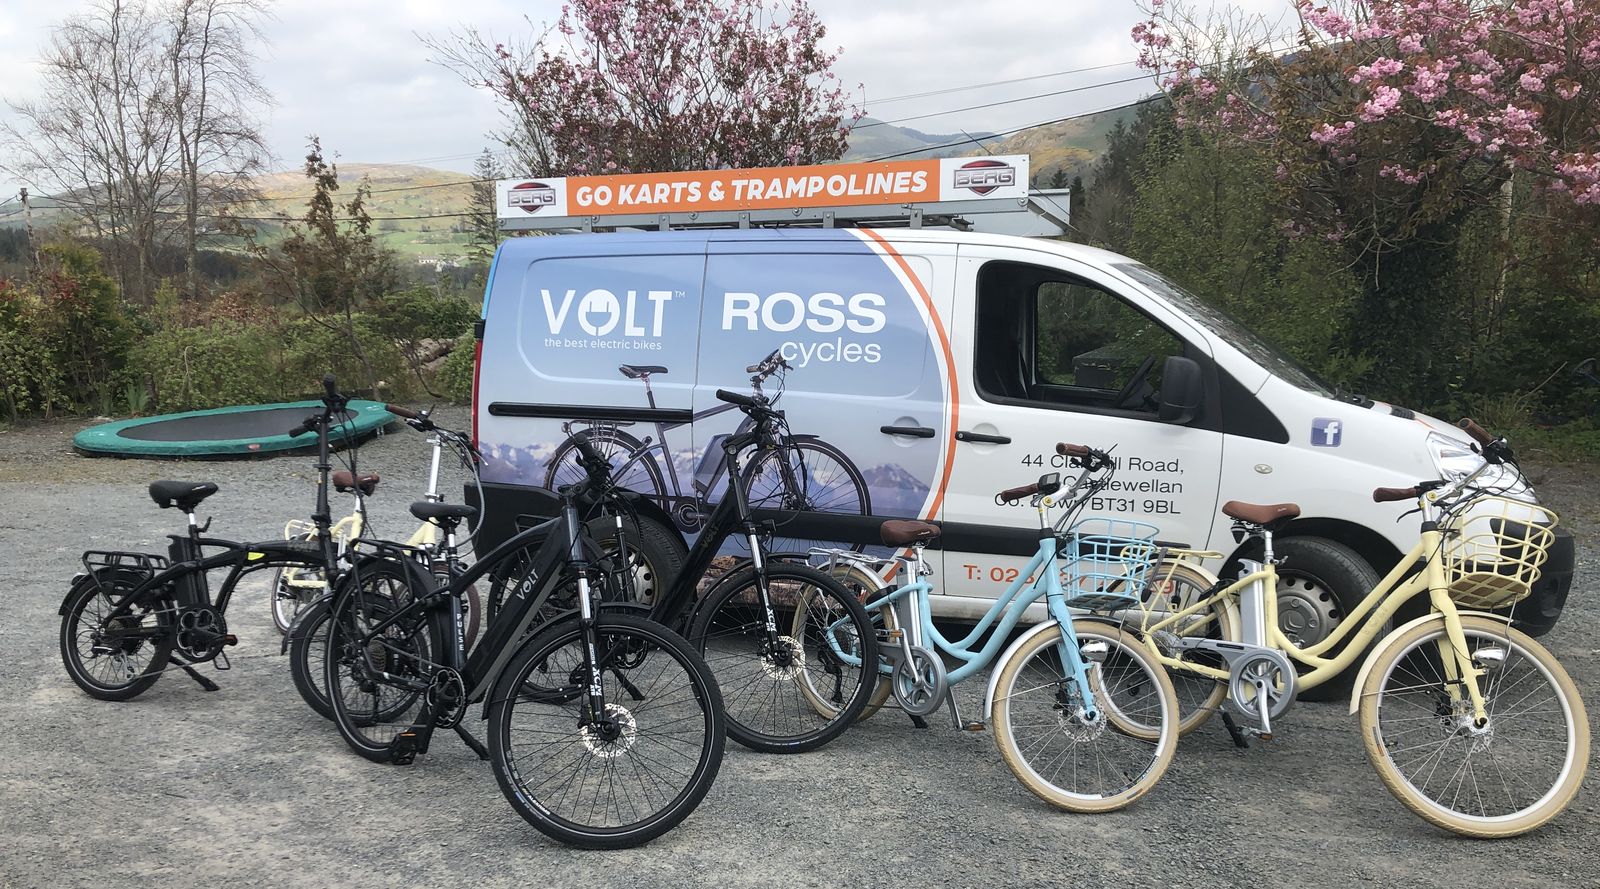 Ross Cycles with Volt Bikes